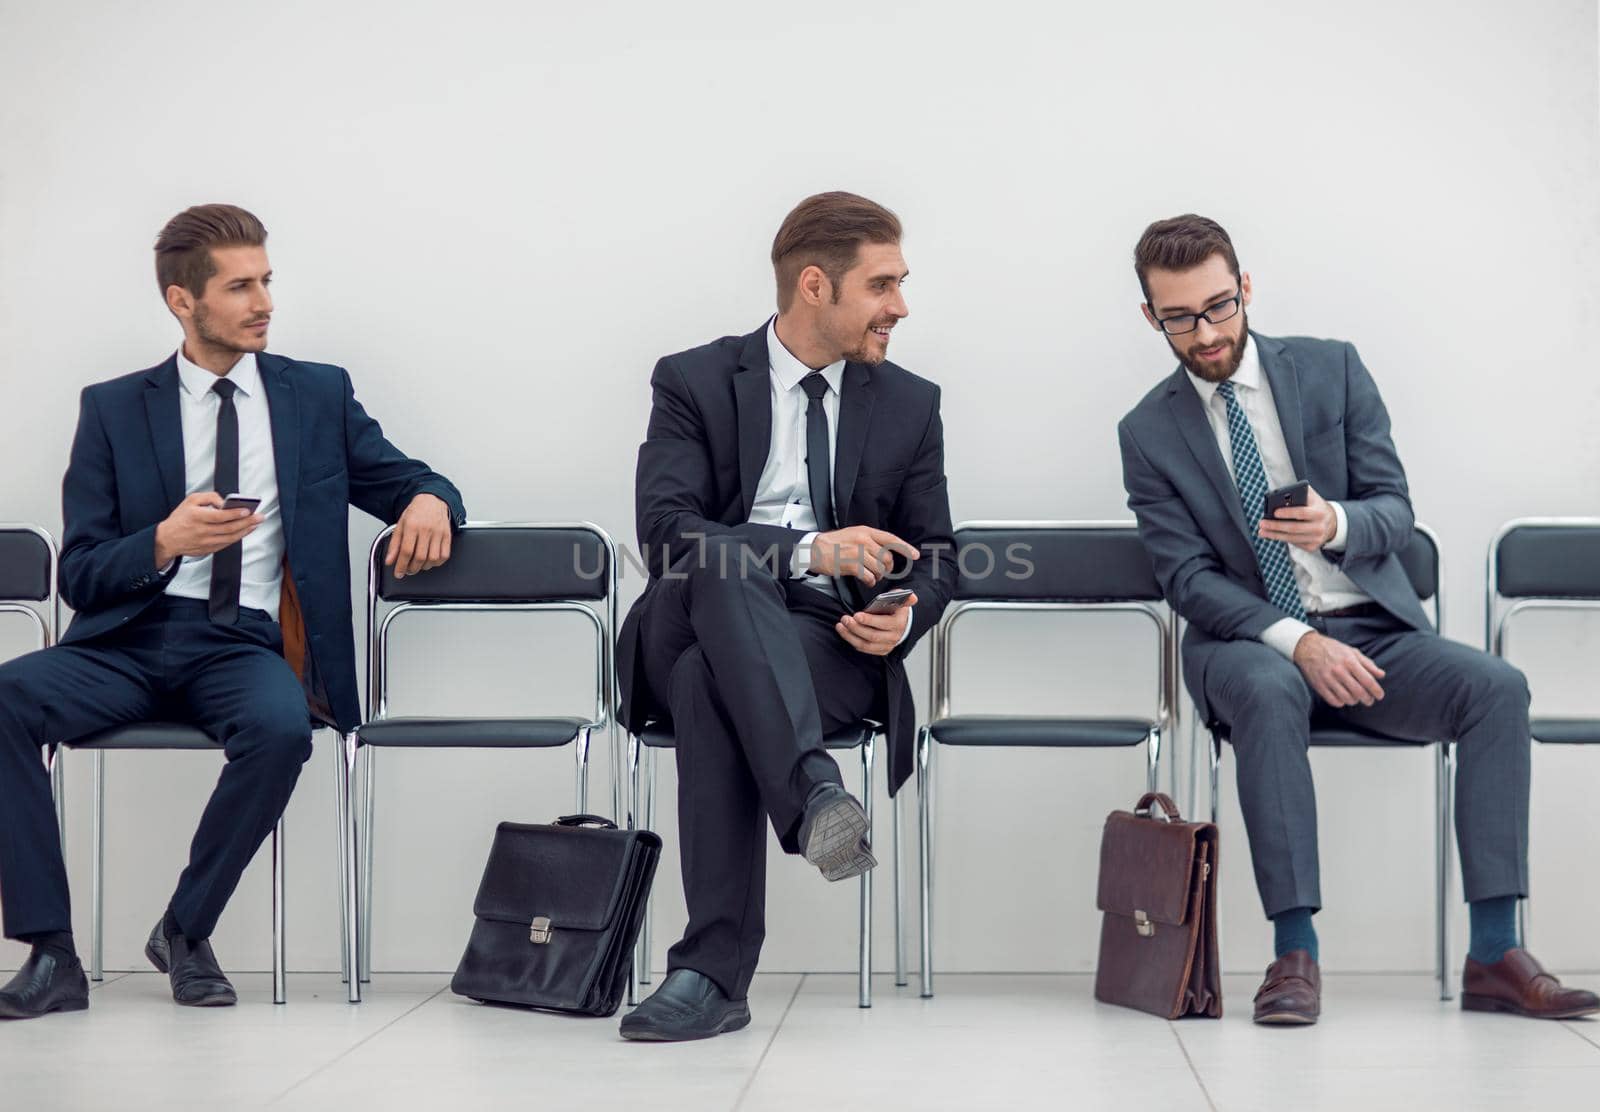 employees with smartphones sitting in the office hallway.photo with copy space